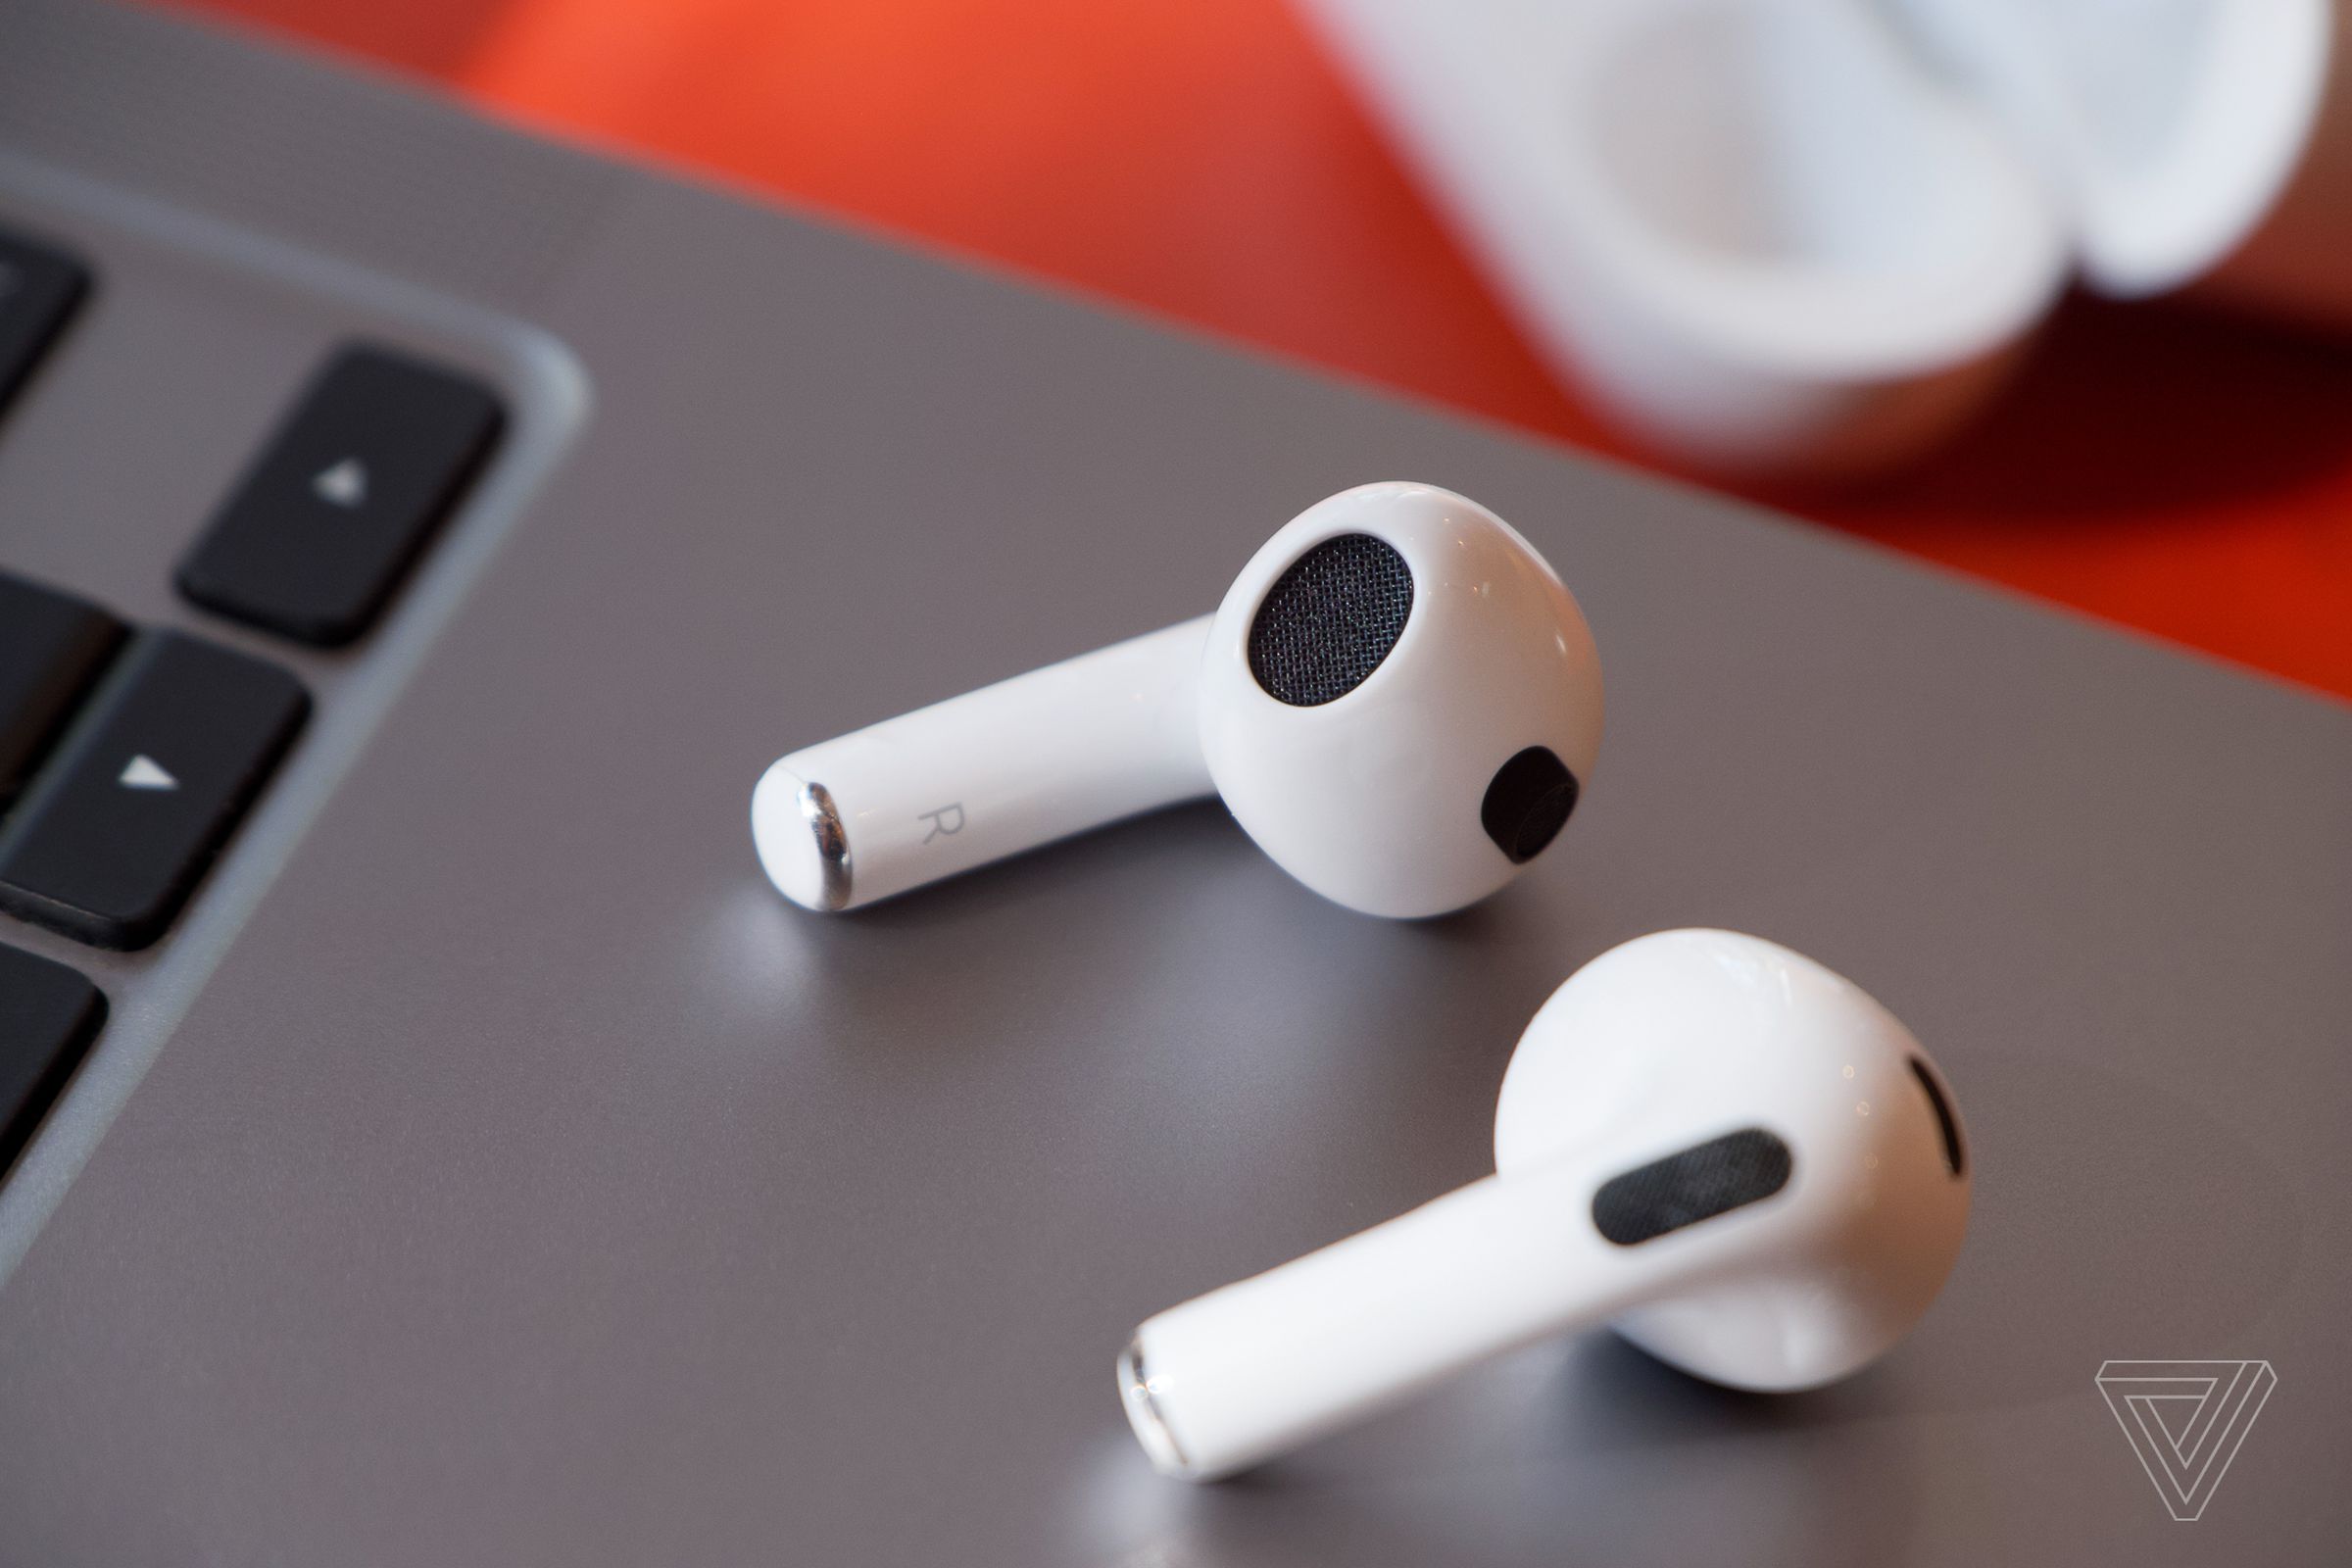 These AirPods are sweat and water resistant, features that come in handy while out for a run.